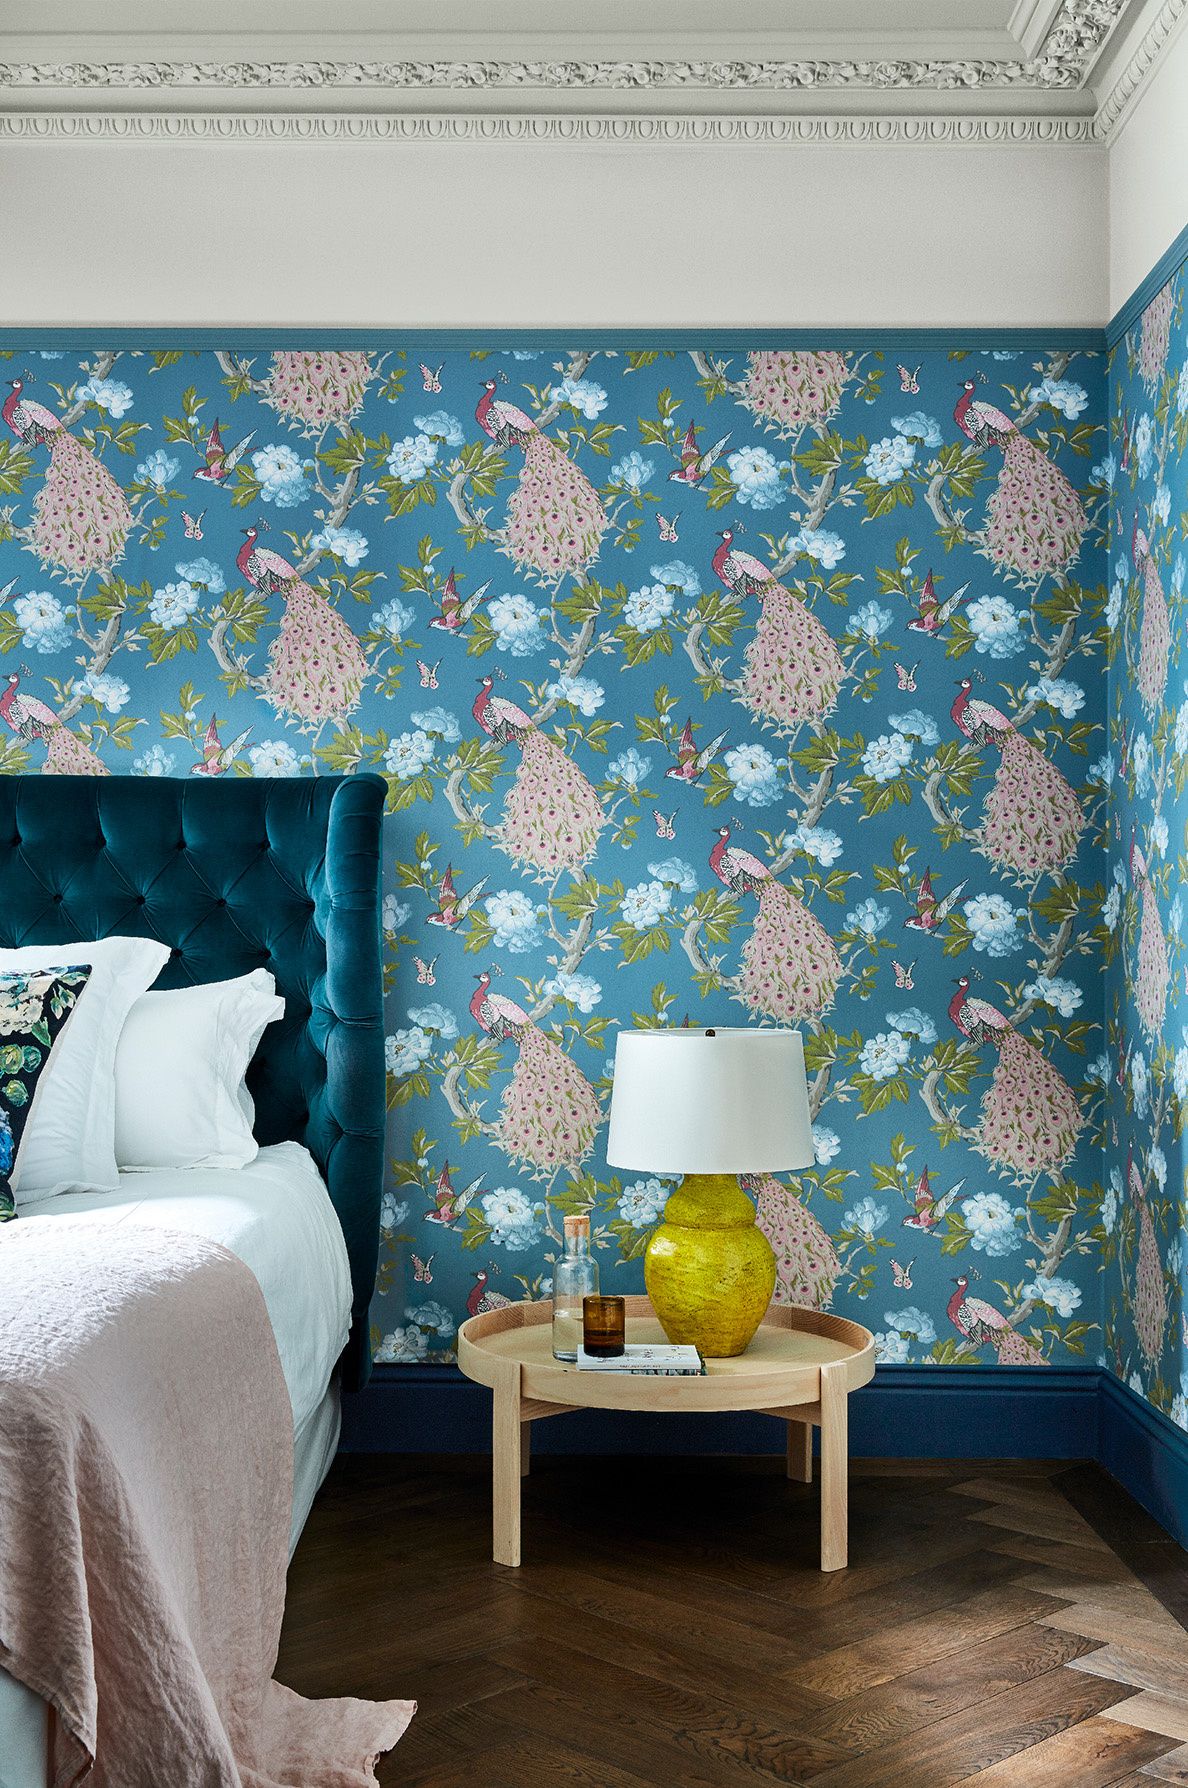 How to Expand Space in Small Room with Wallpaper  InteriorHoliccom